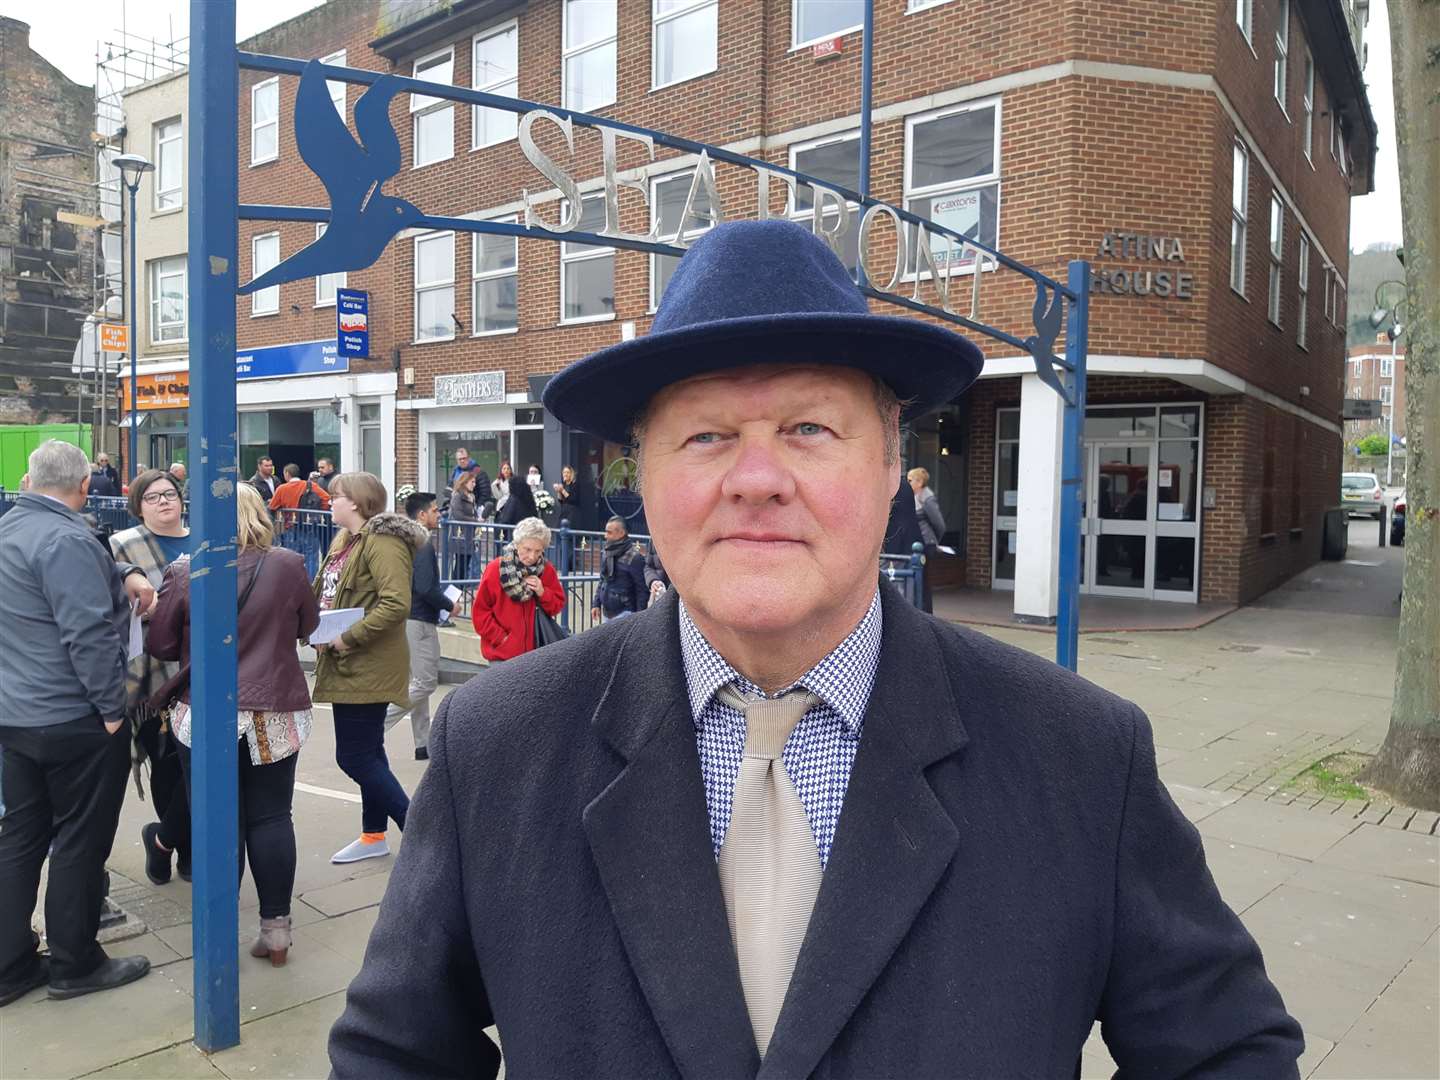 Cllr Graham Wanstall photographed outside the subway